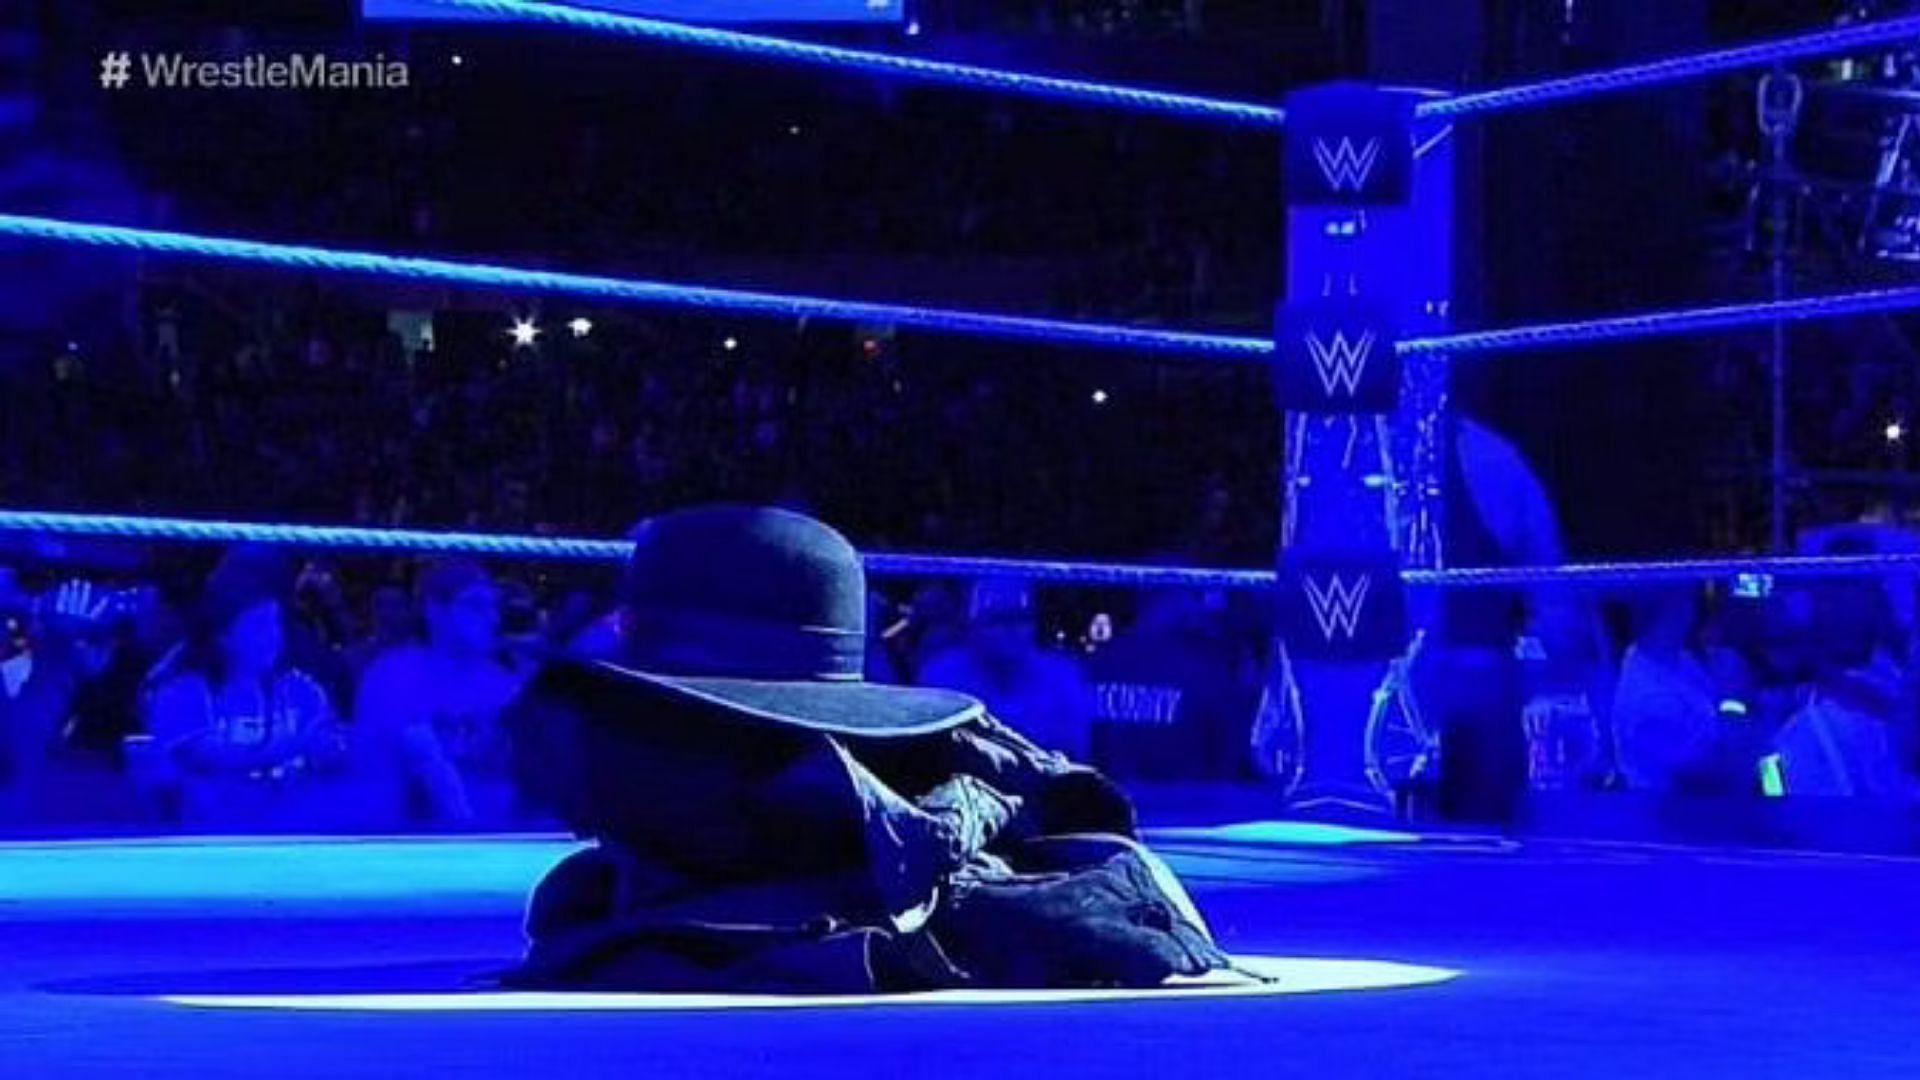 The WWE Universe believed that The Undertaker had retired after WrestleMania 33